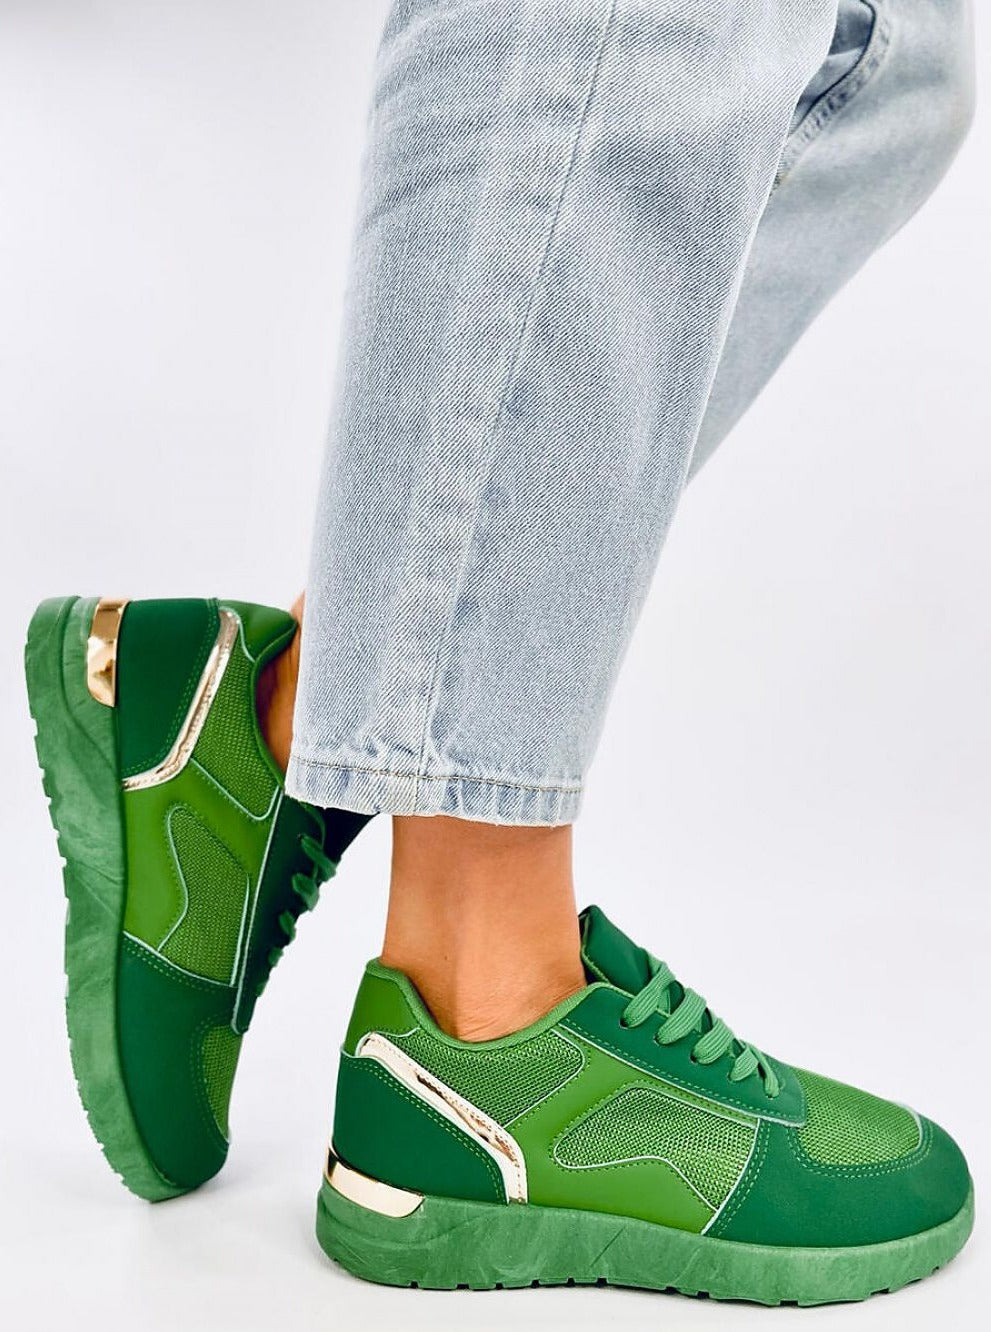 TEEK - Green Laced Texture Sneakers SHOES Inello   